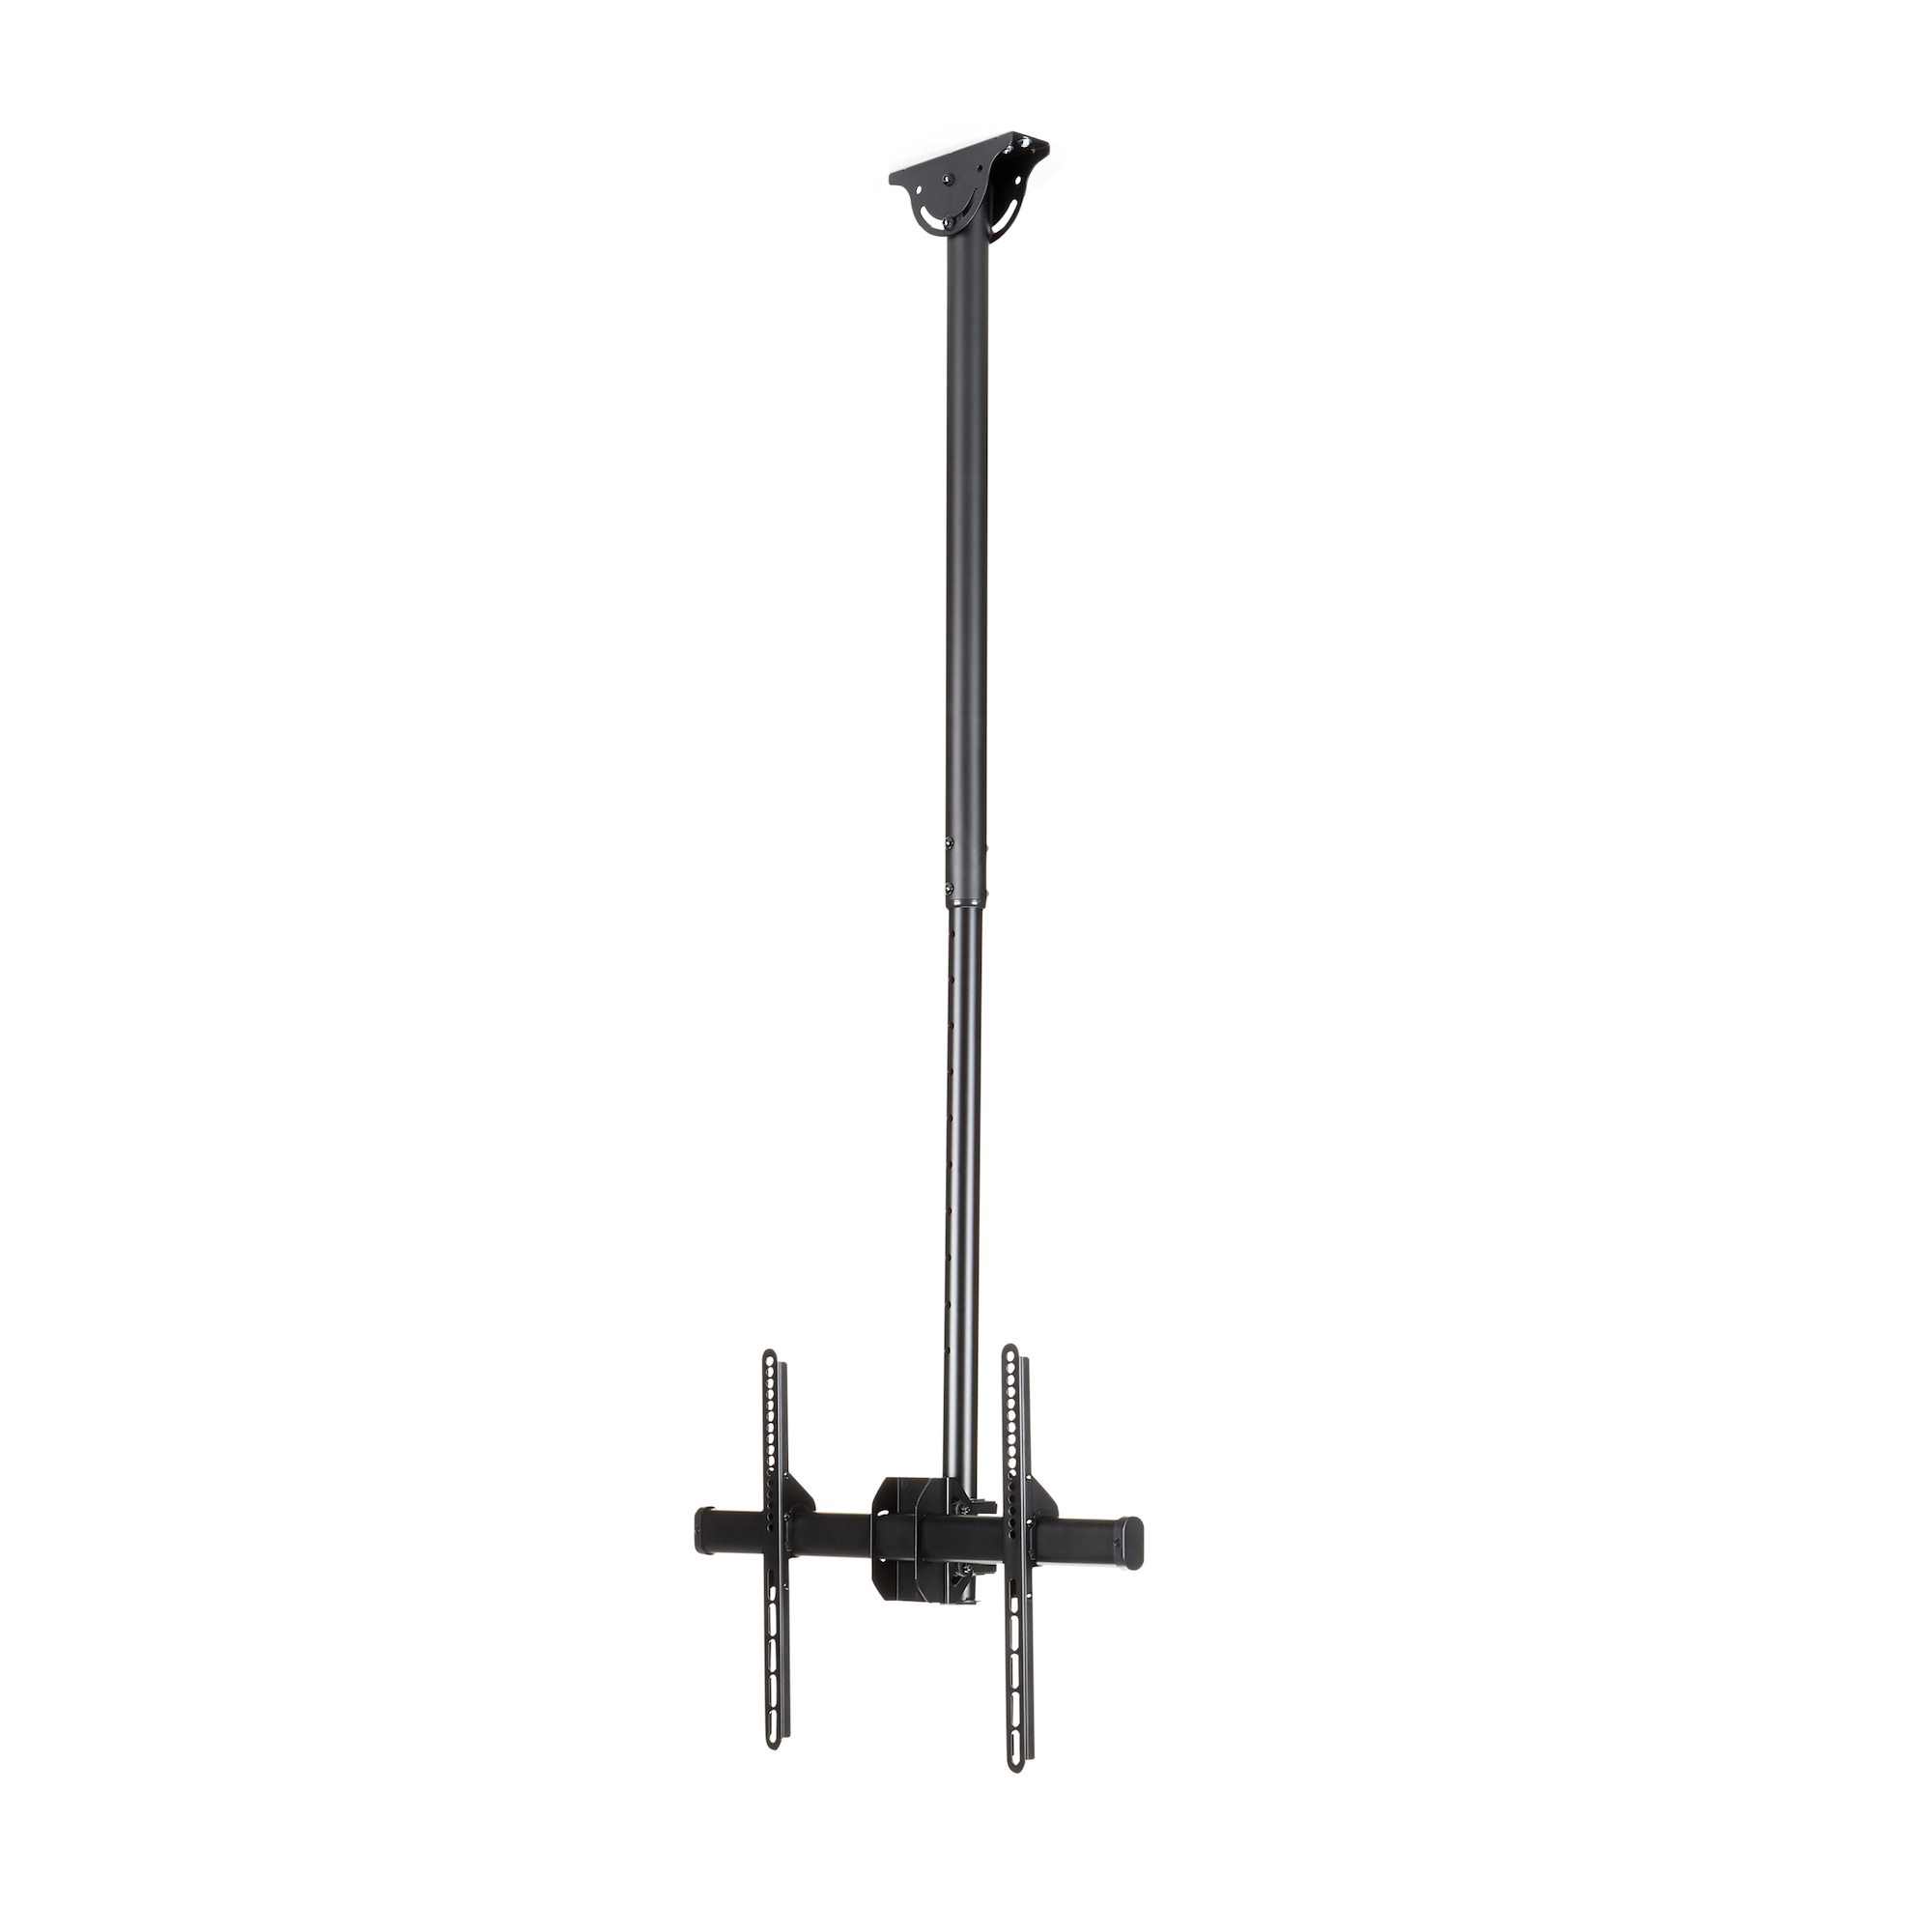 Chief MCS6364 Ceiling Pole Mount Bracket holds up to 125lbs 55-inches Monitor TV 